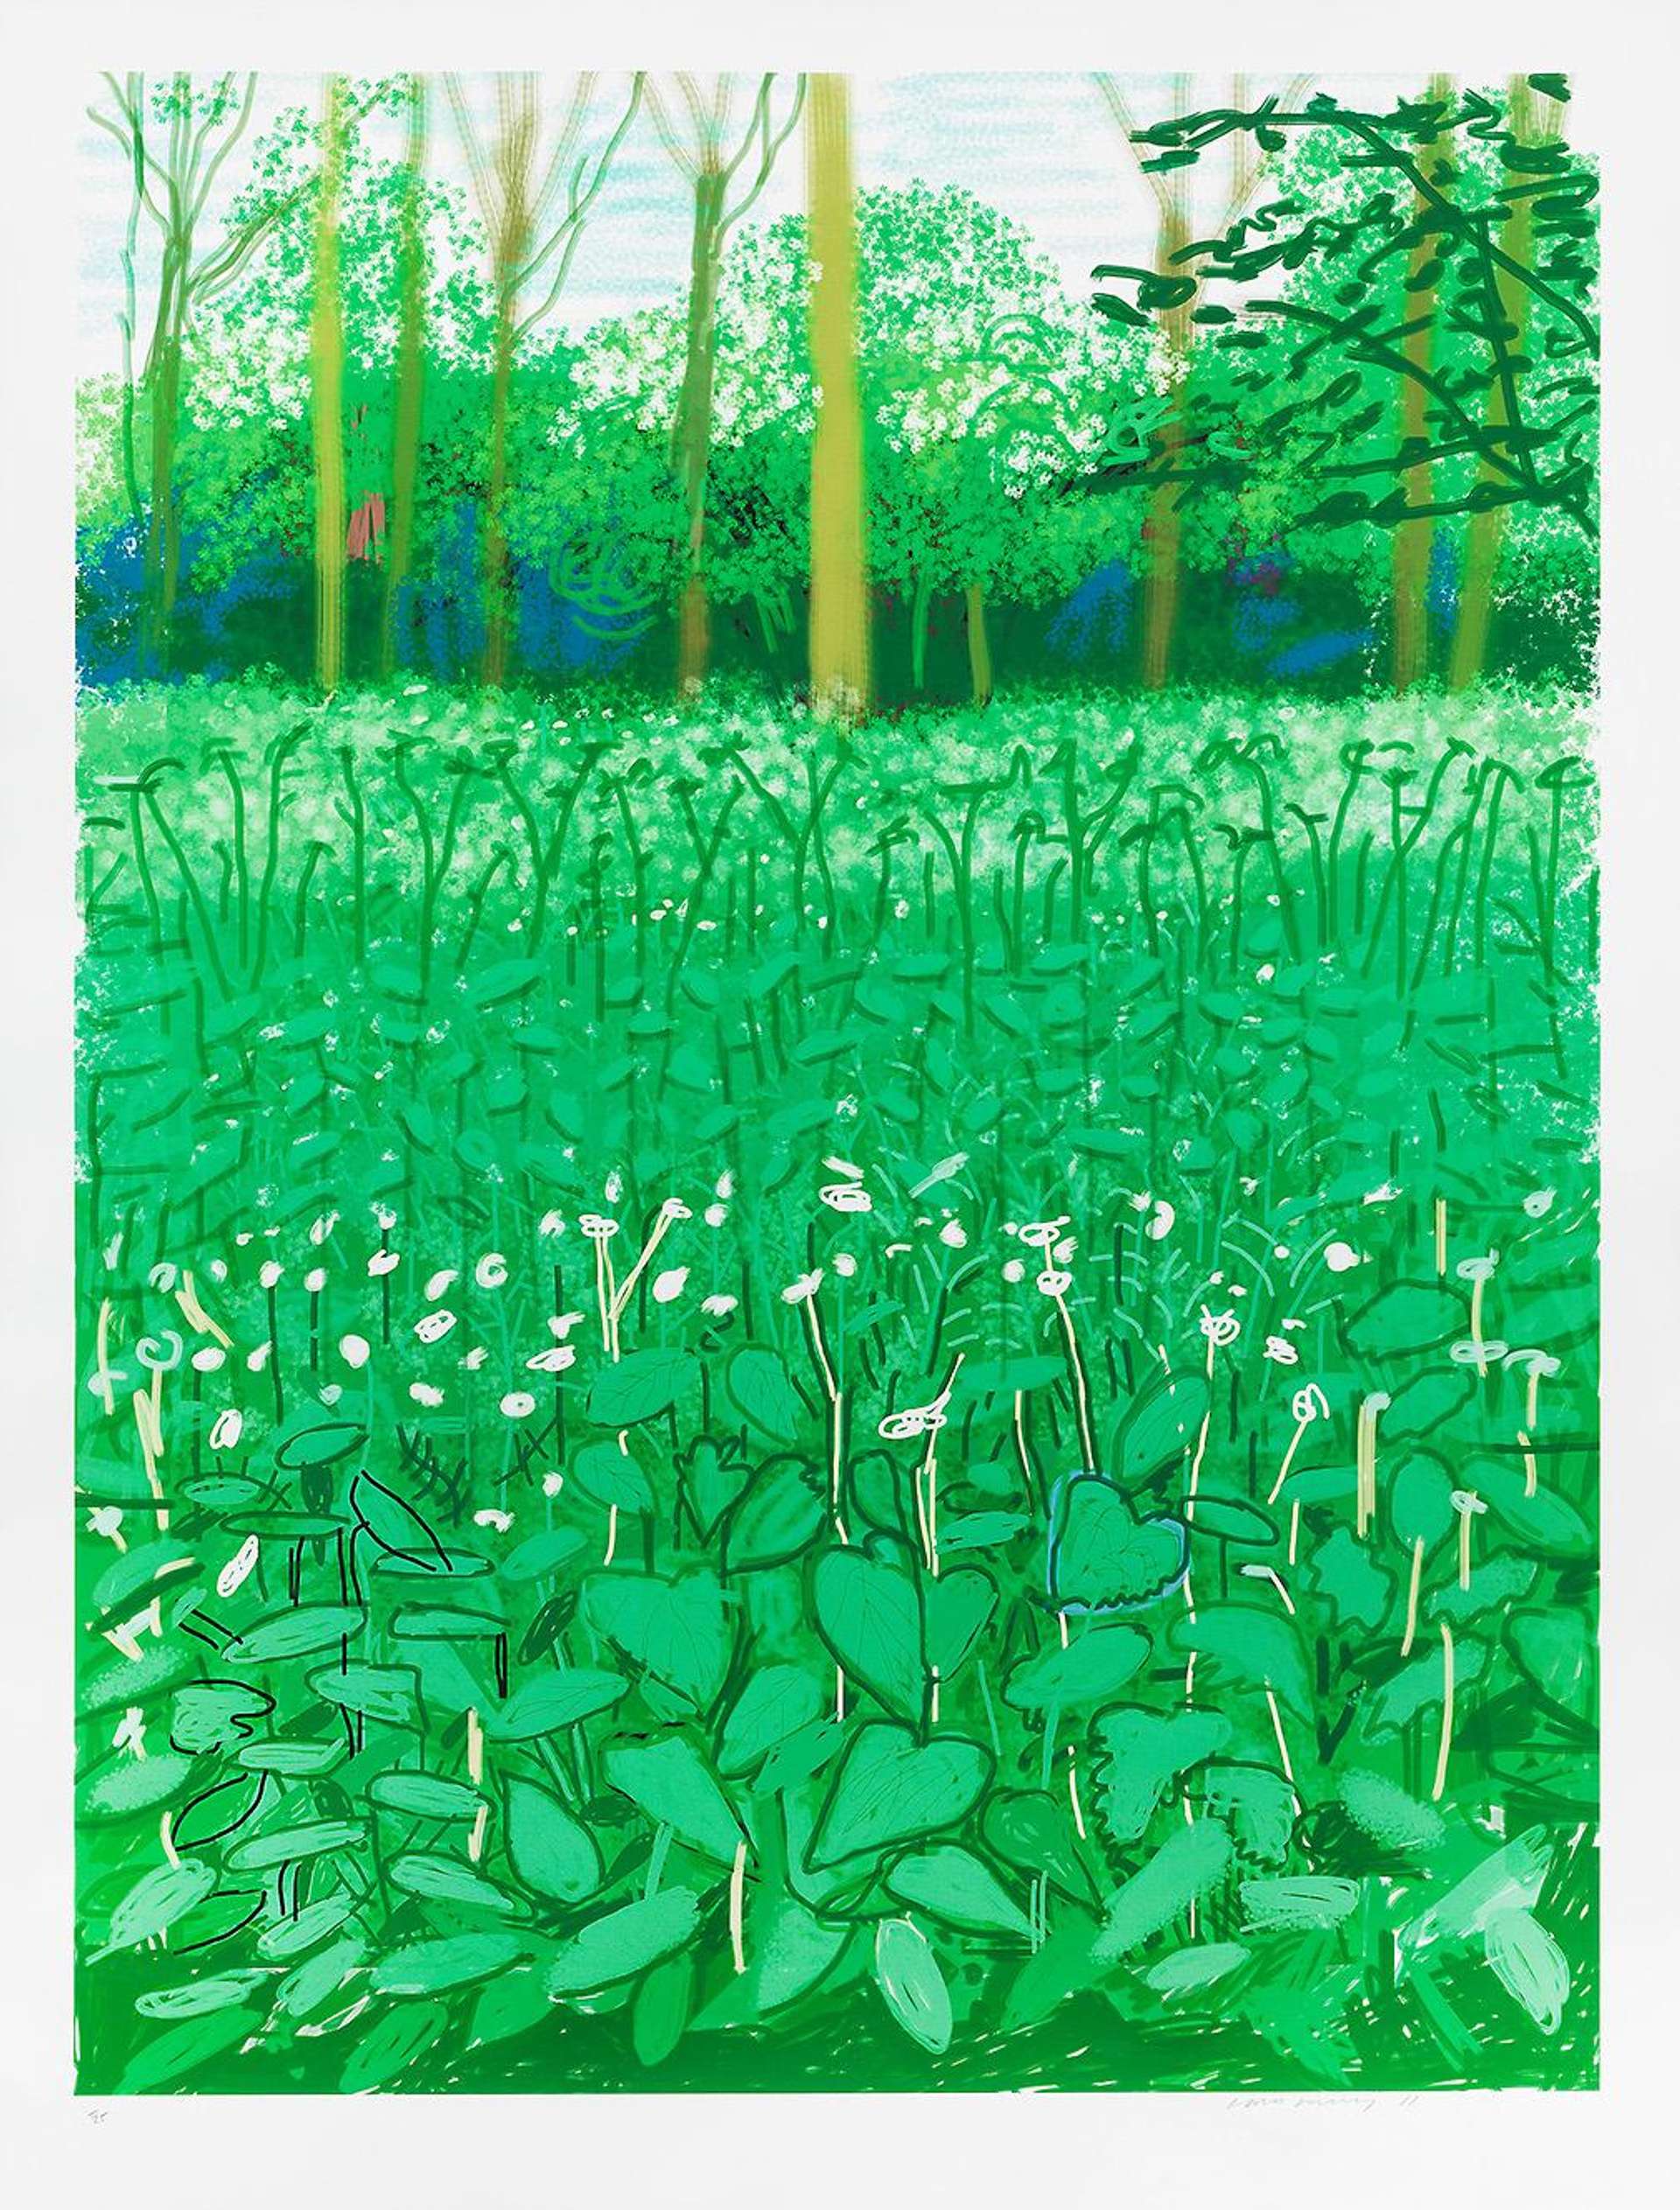 A digital print by David Hockney depicting a green field of leaves and white flowers, with trees receding into the background.